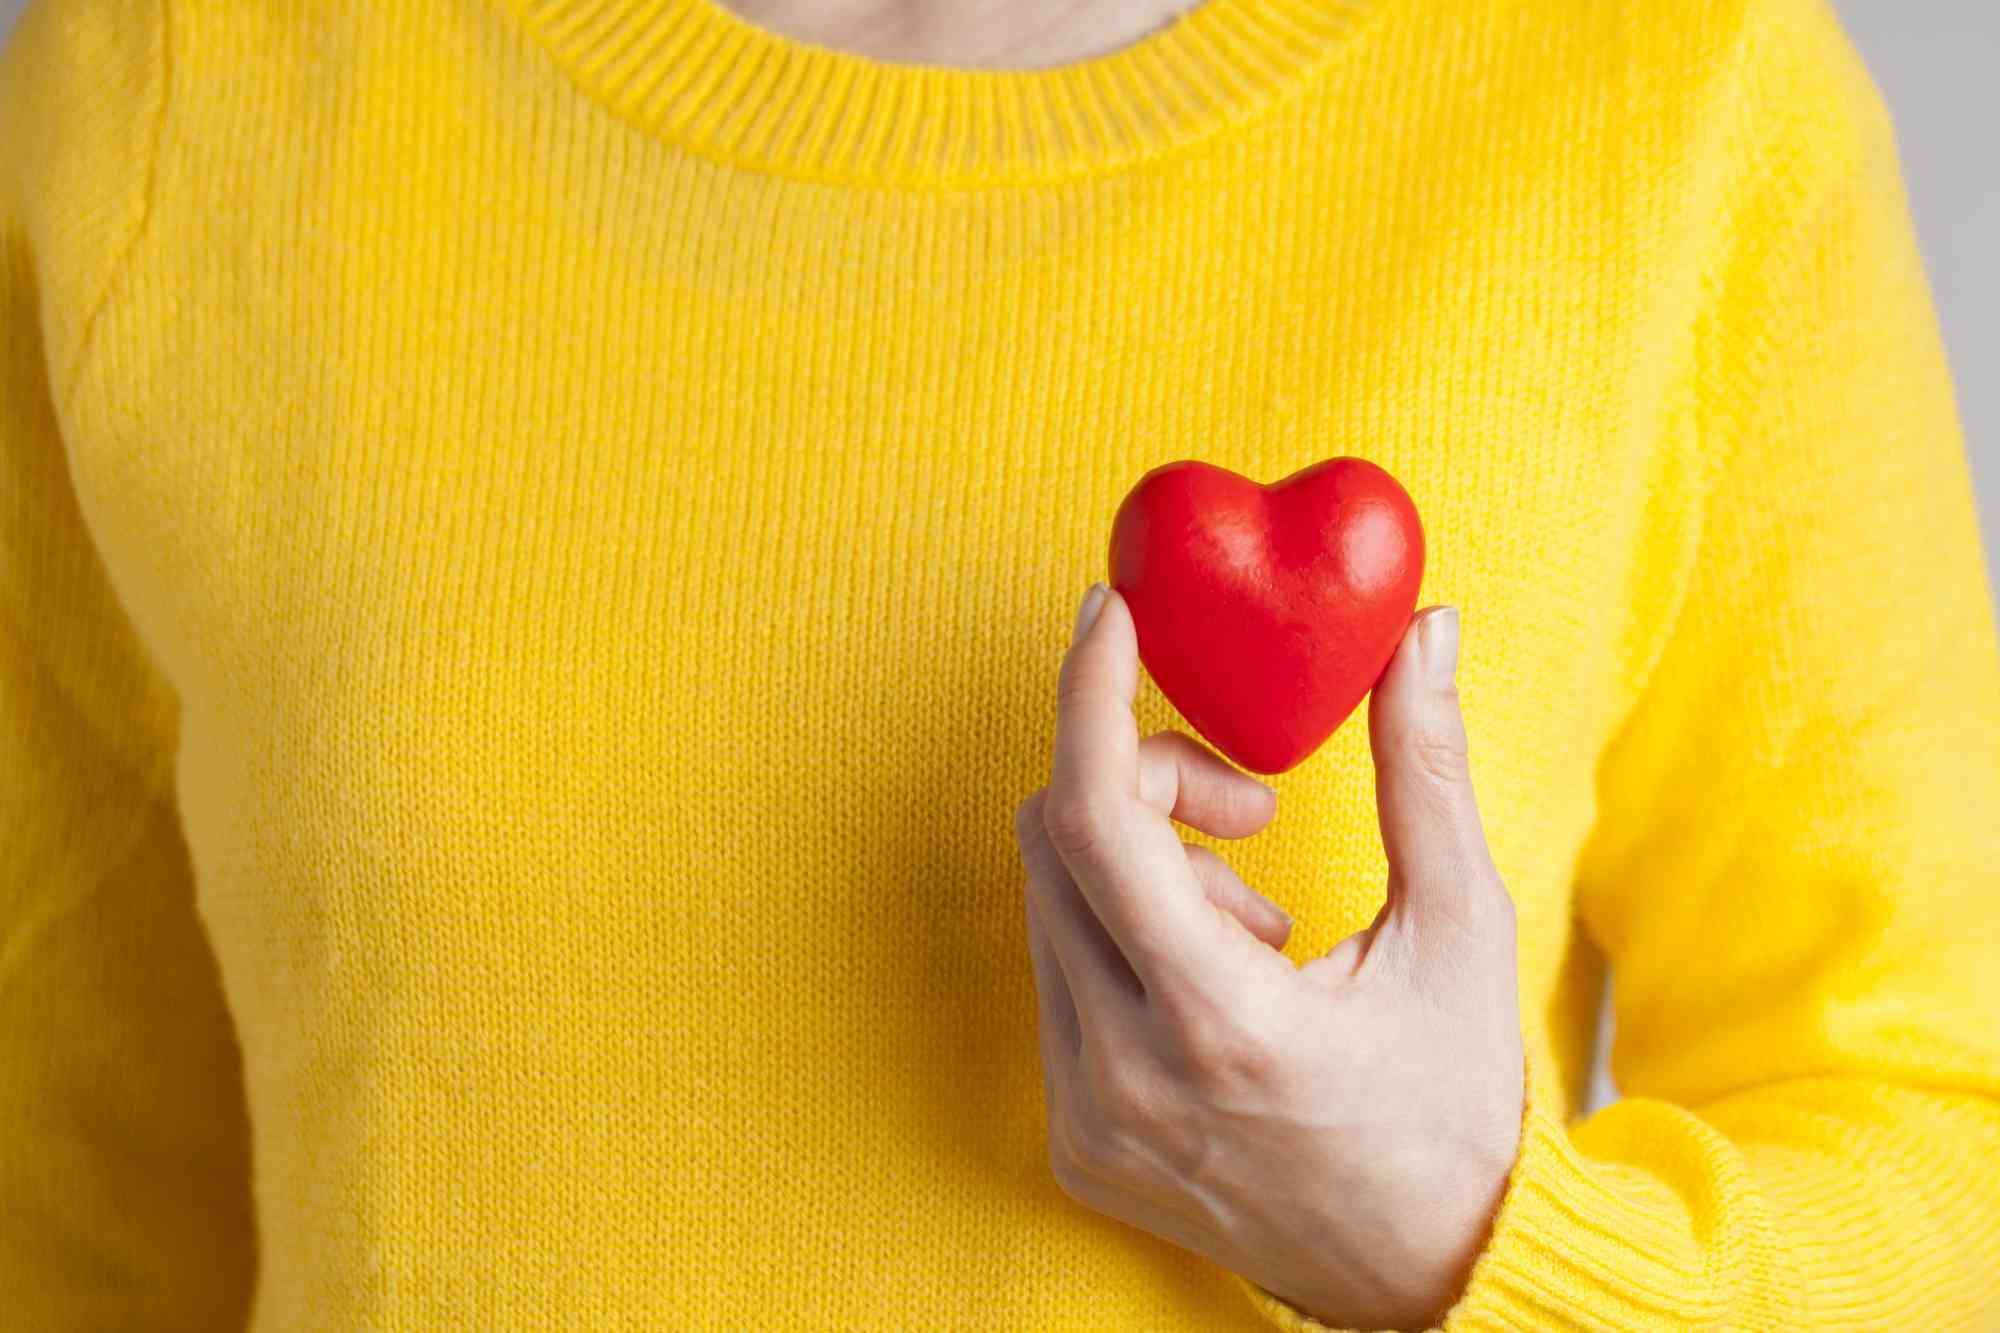 Hand of a person holding a plastic heart while wearing a bright yellow sweater.